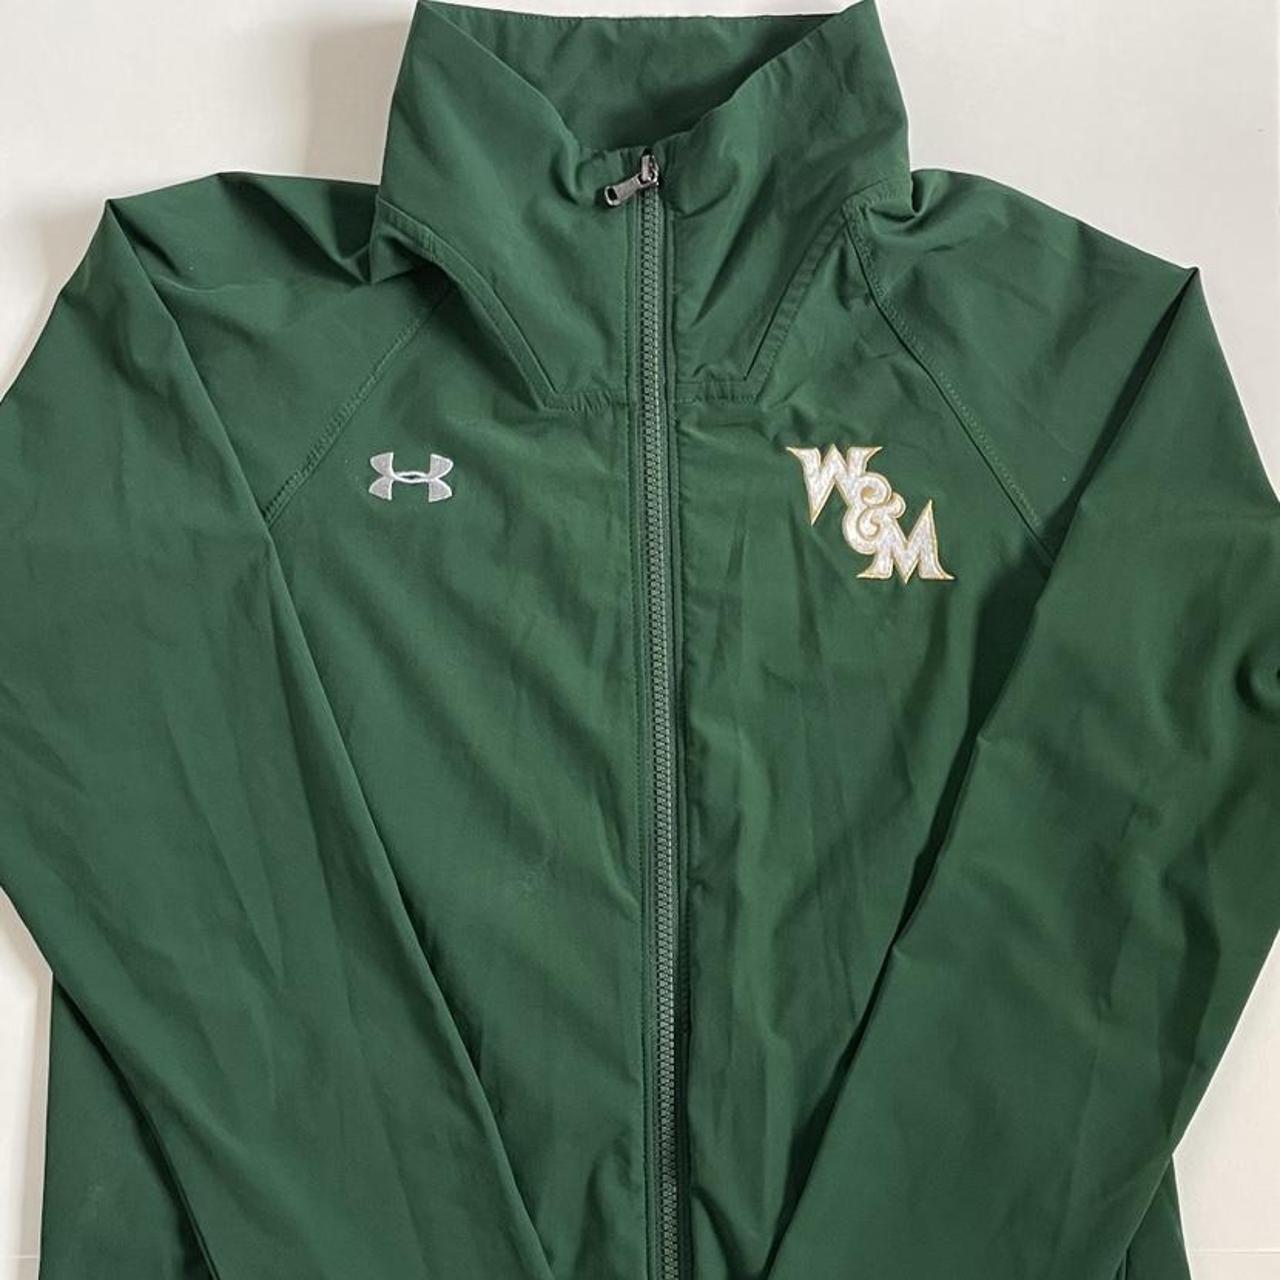 Under Armour Men's Green and White Jacket | Depop